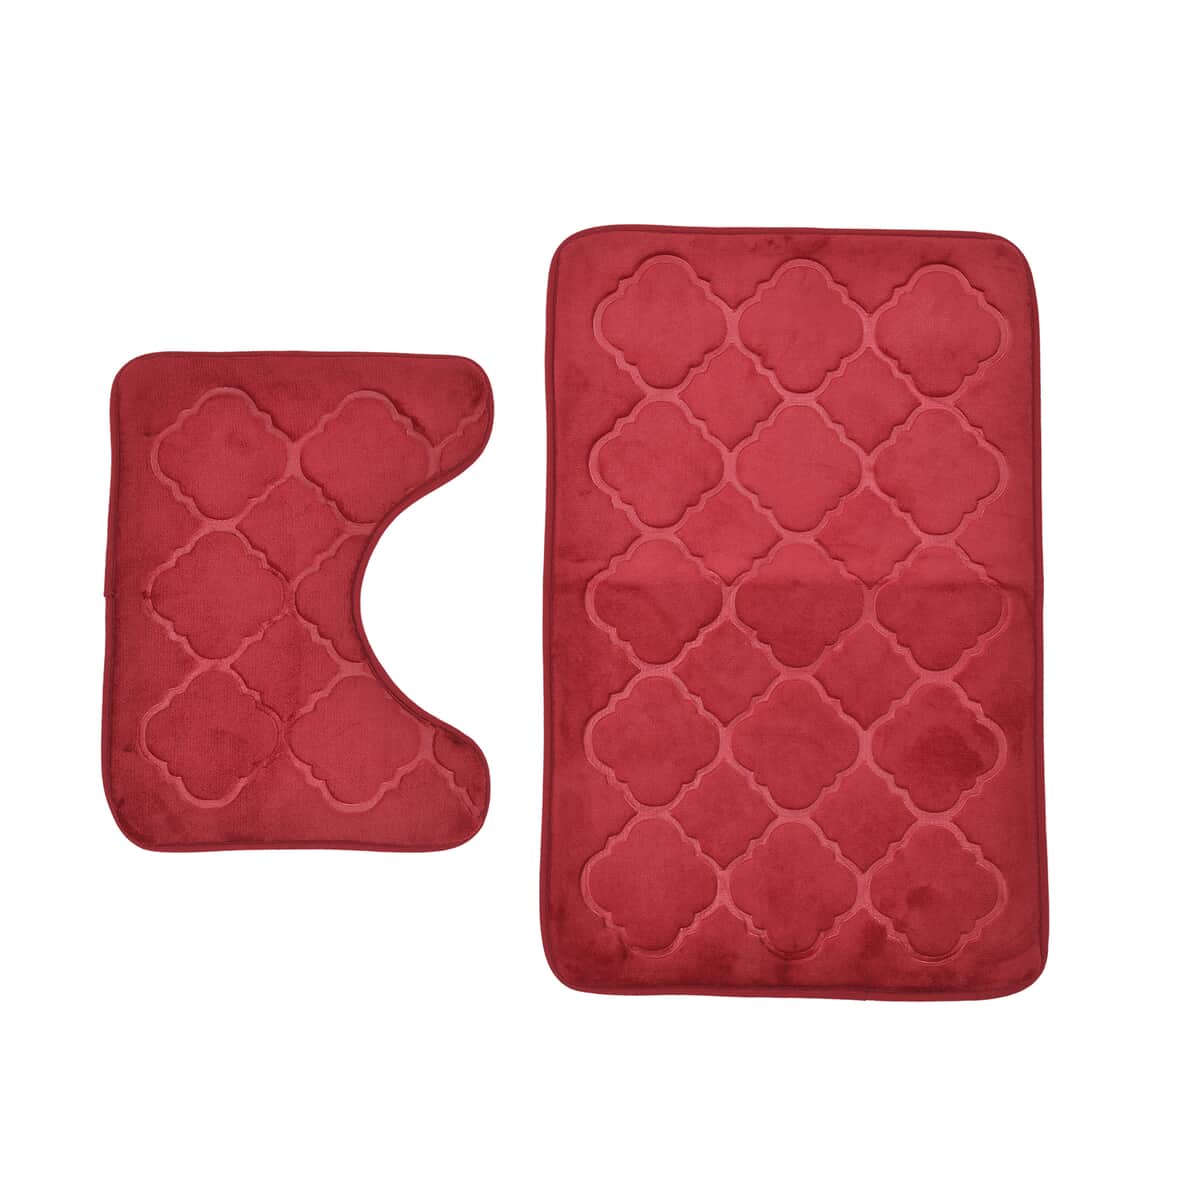 Red Embossed Flannel Rectangular Bathmat and Contour Toilet Mat image number 0